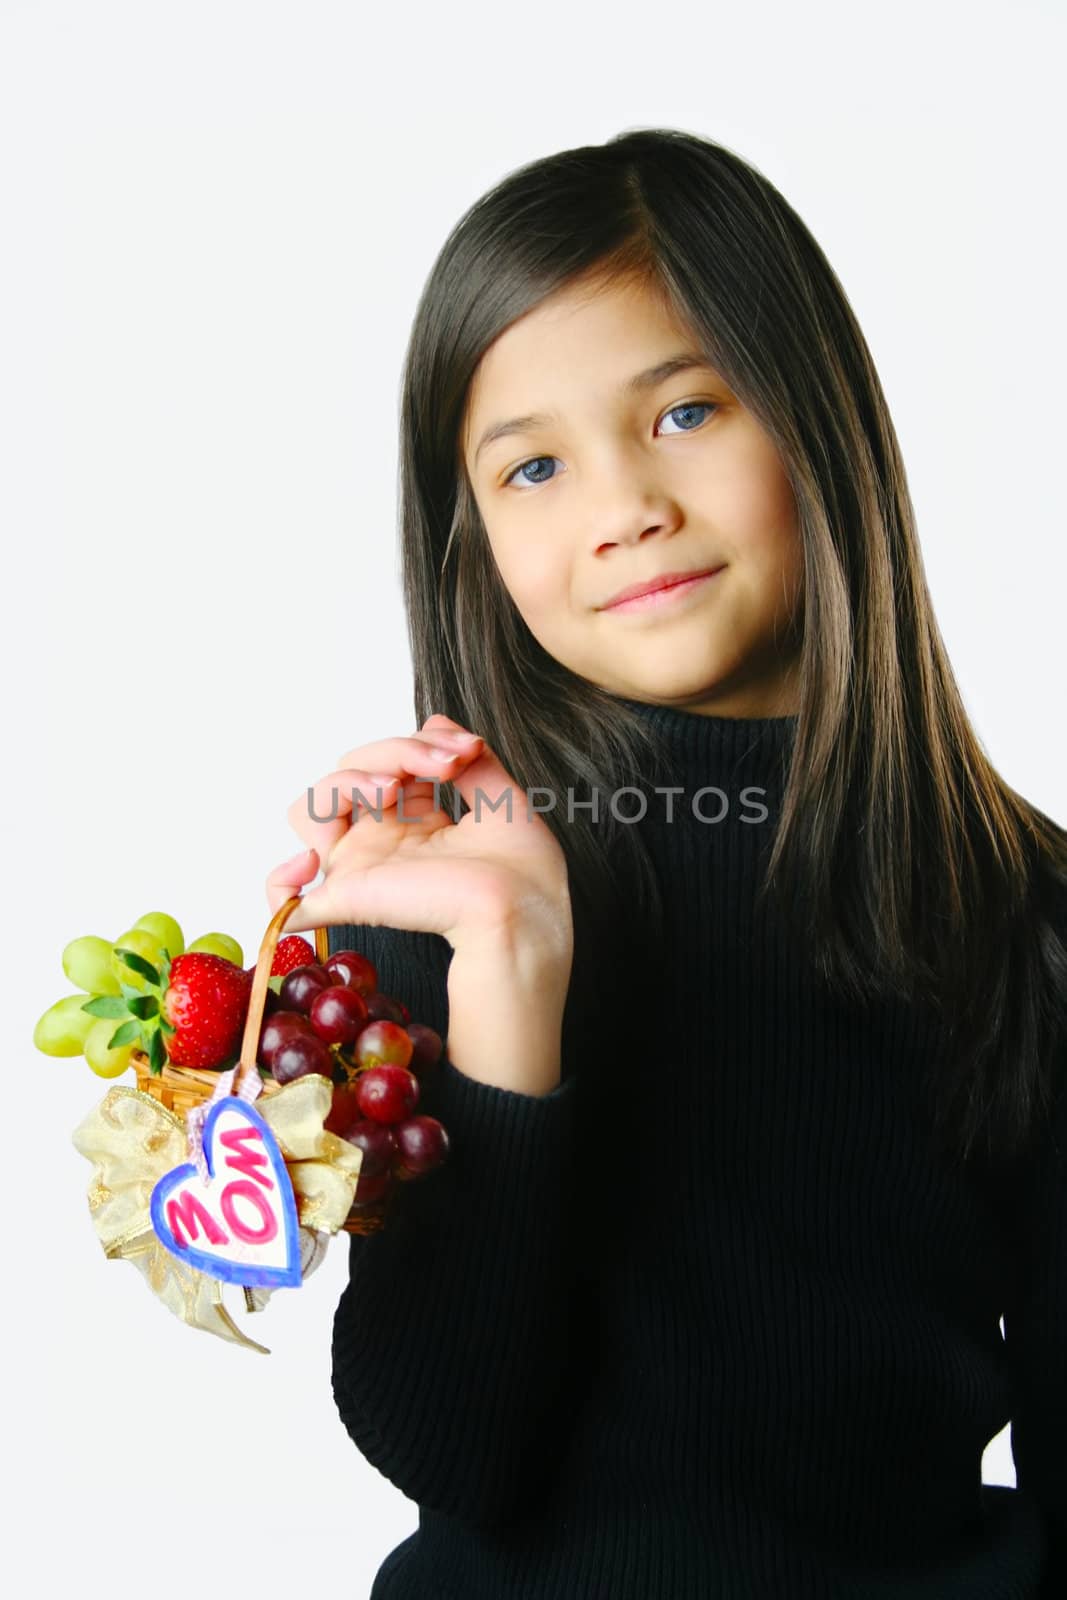 Small girl holding a small basket of fruit for mom